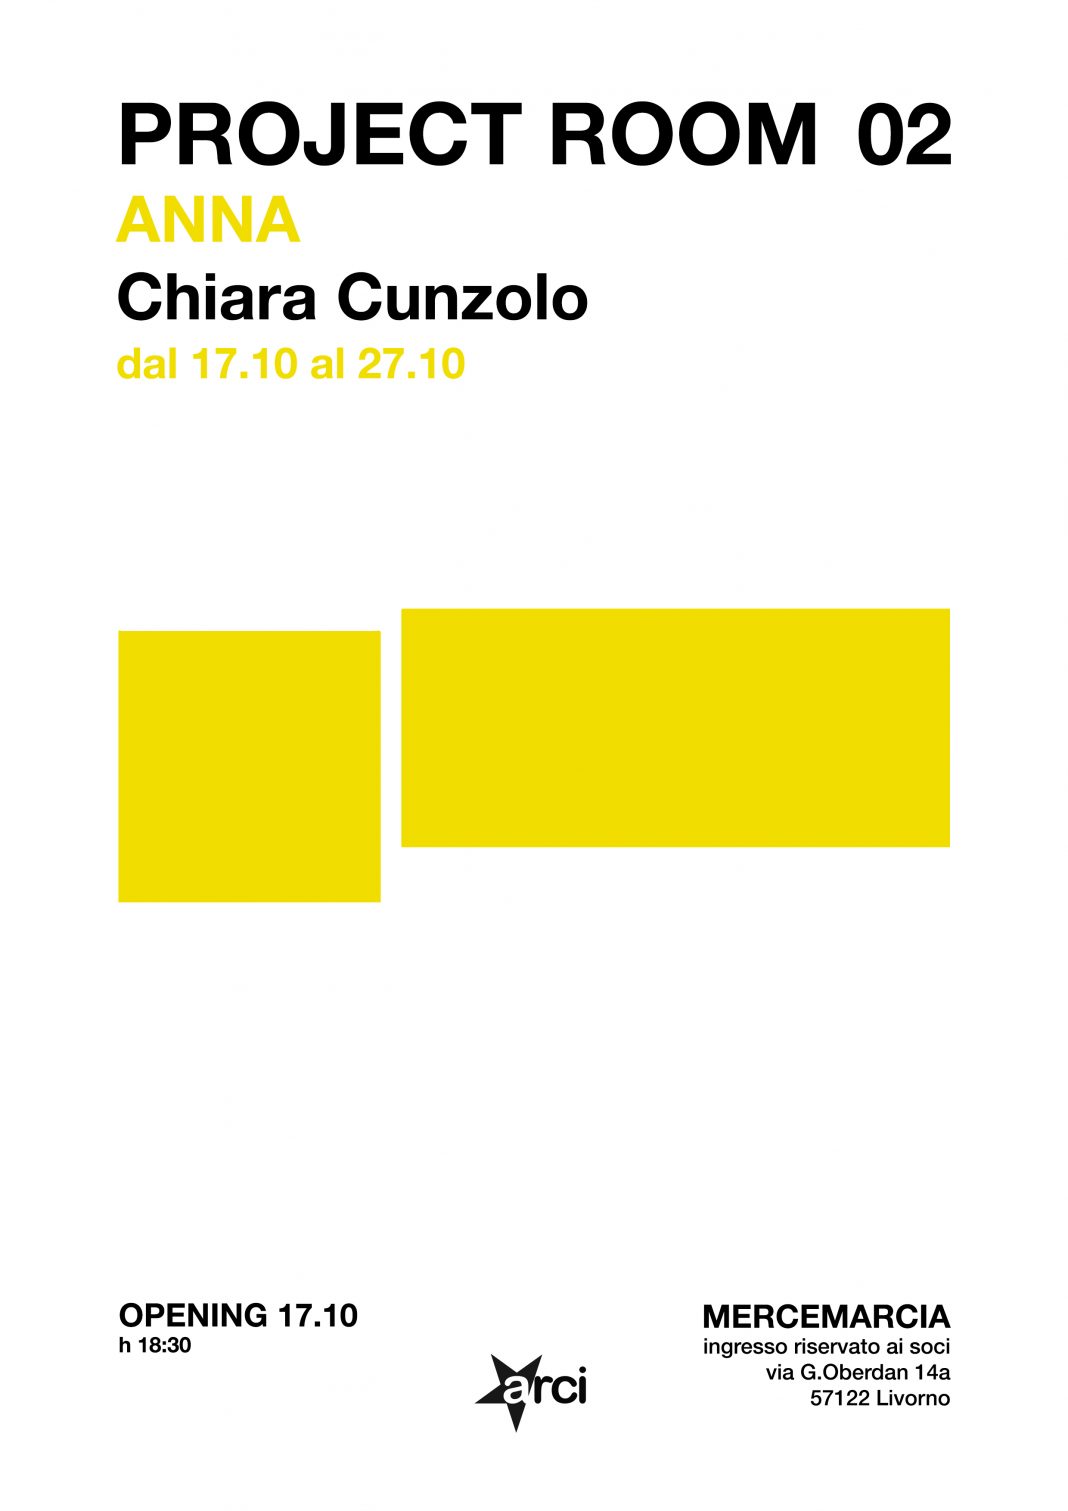 Project Room #02: Chiara Cunzolo – Annahttps://www.exibart.com/repository/media/formidable/11/PROJECT-ROOM-02-flyer-a4-1068x1511.jpg